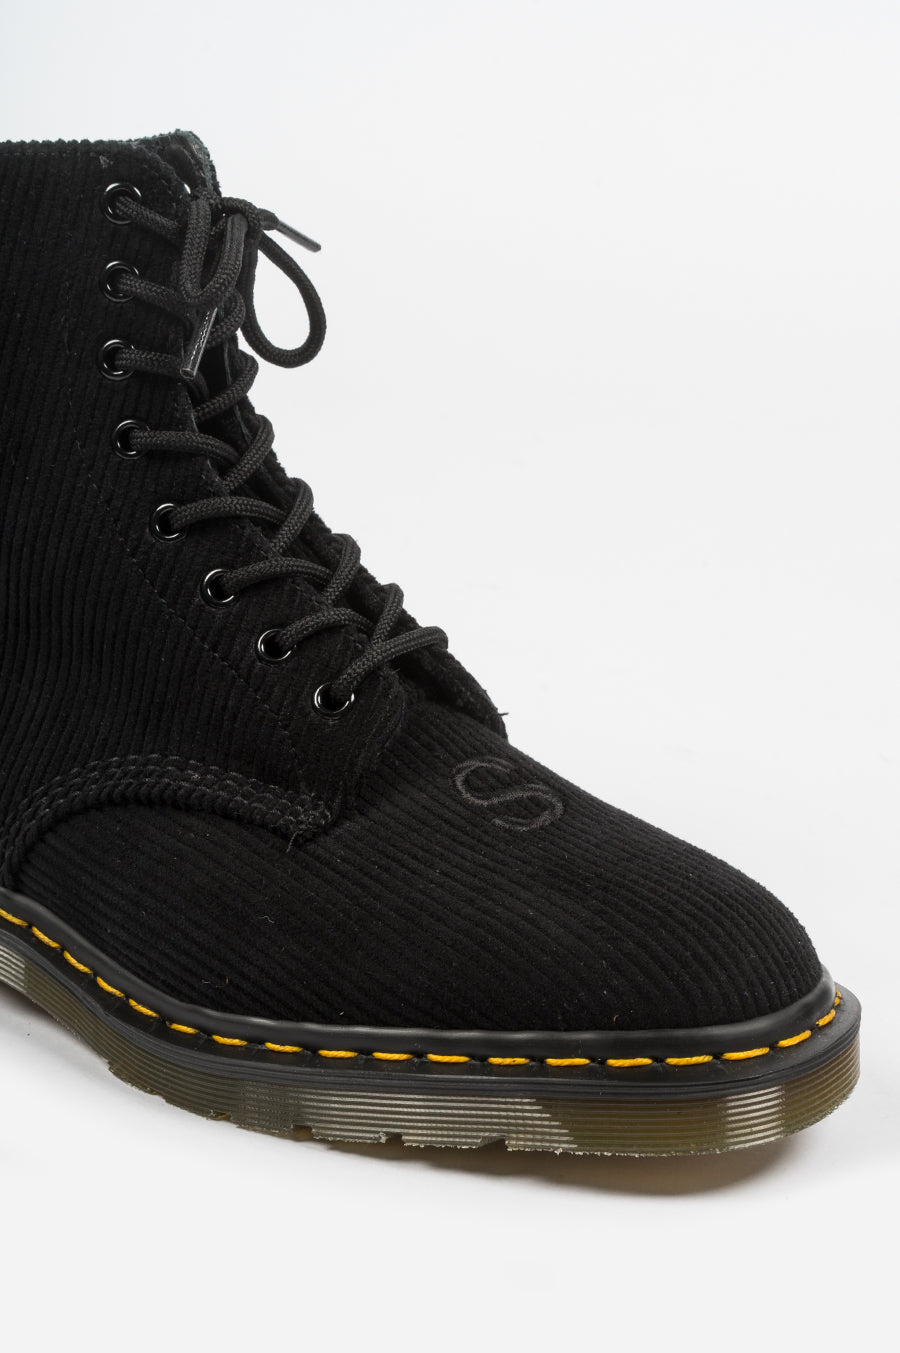 DR MARTENS X UNDERCOVER 1460 REMASTERED BLACK CORD